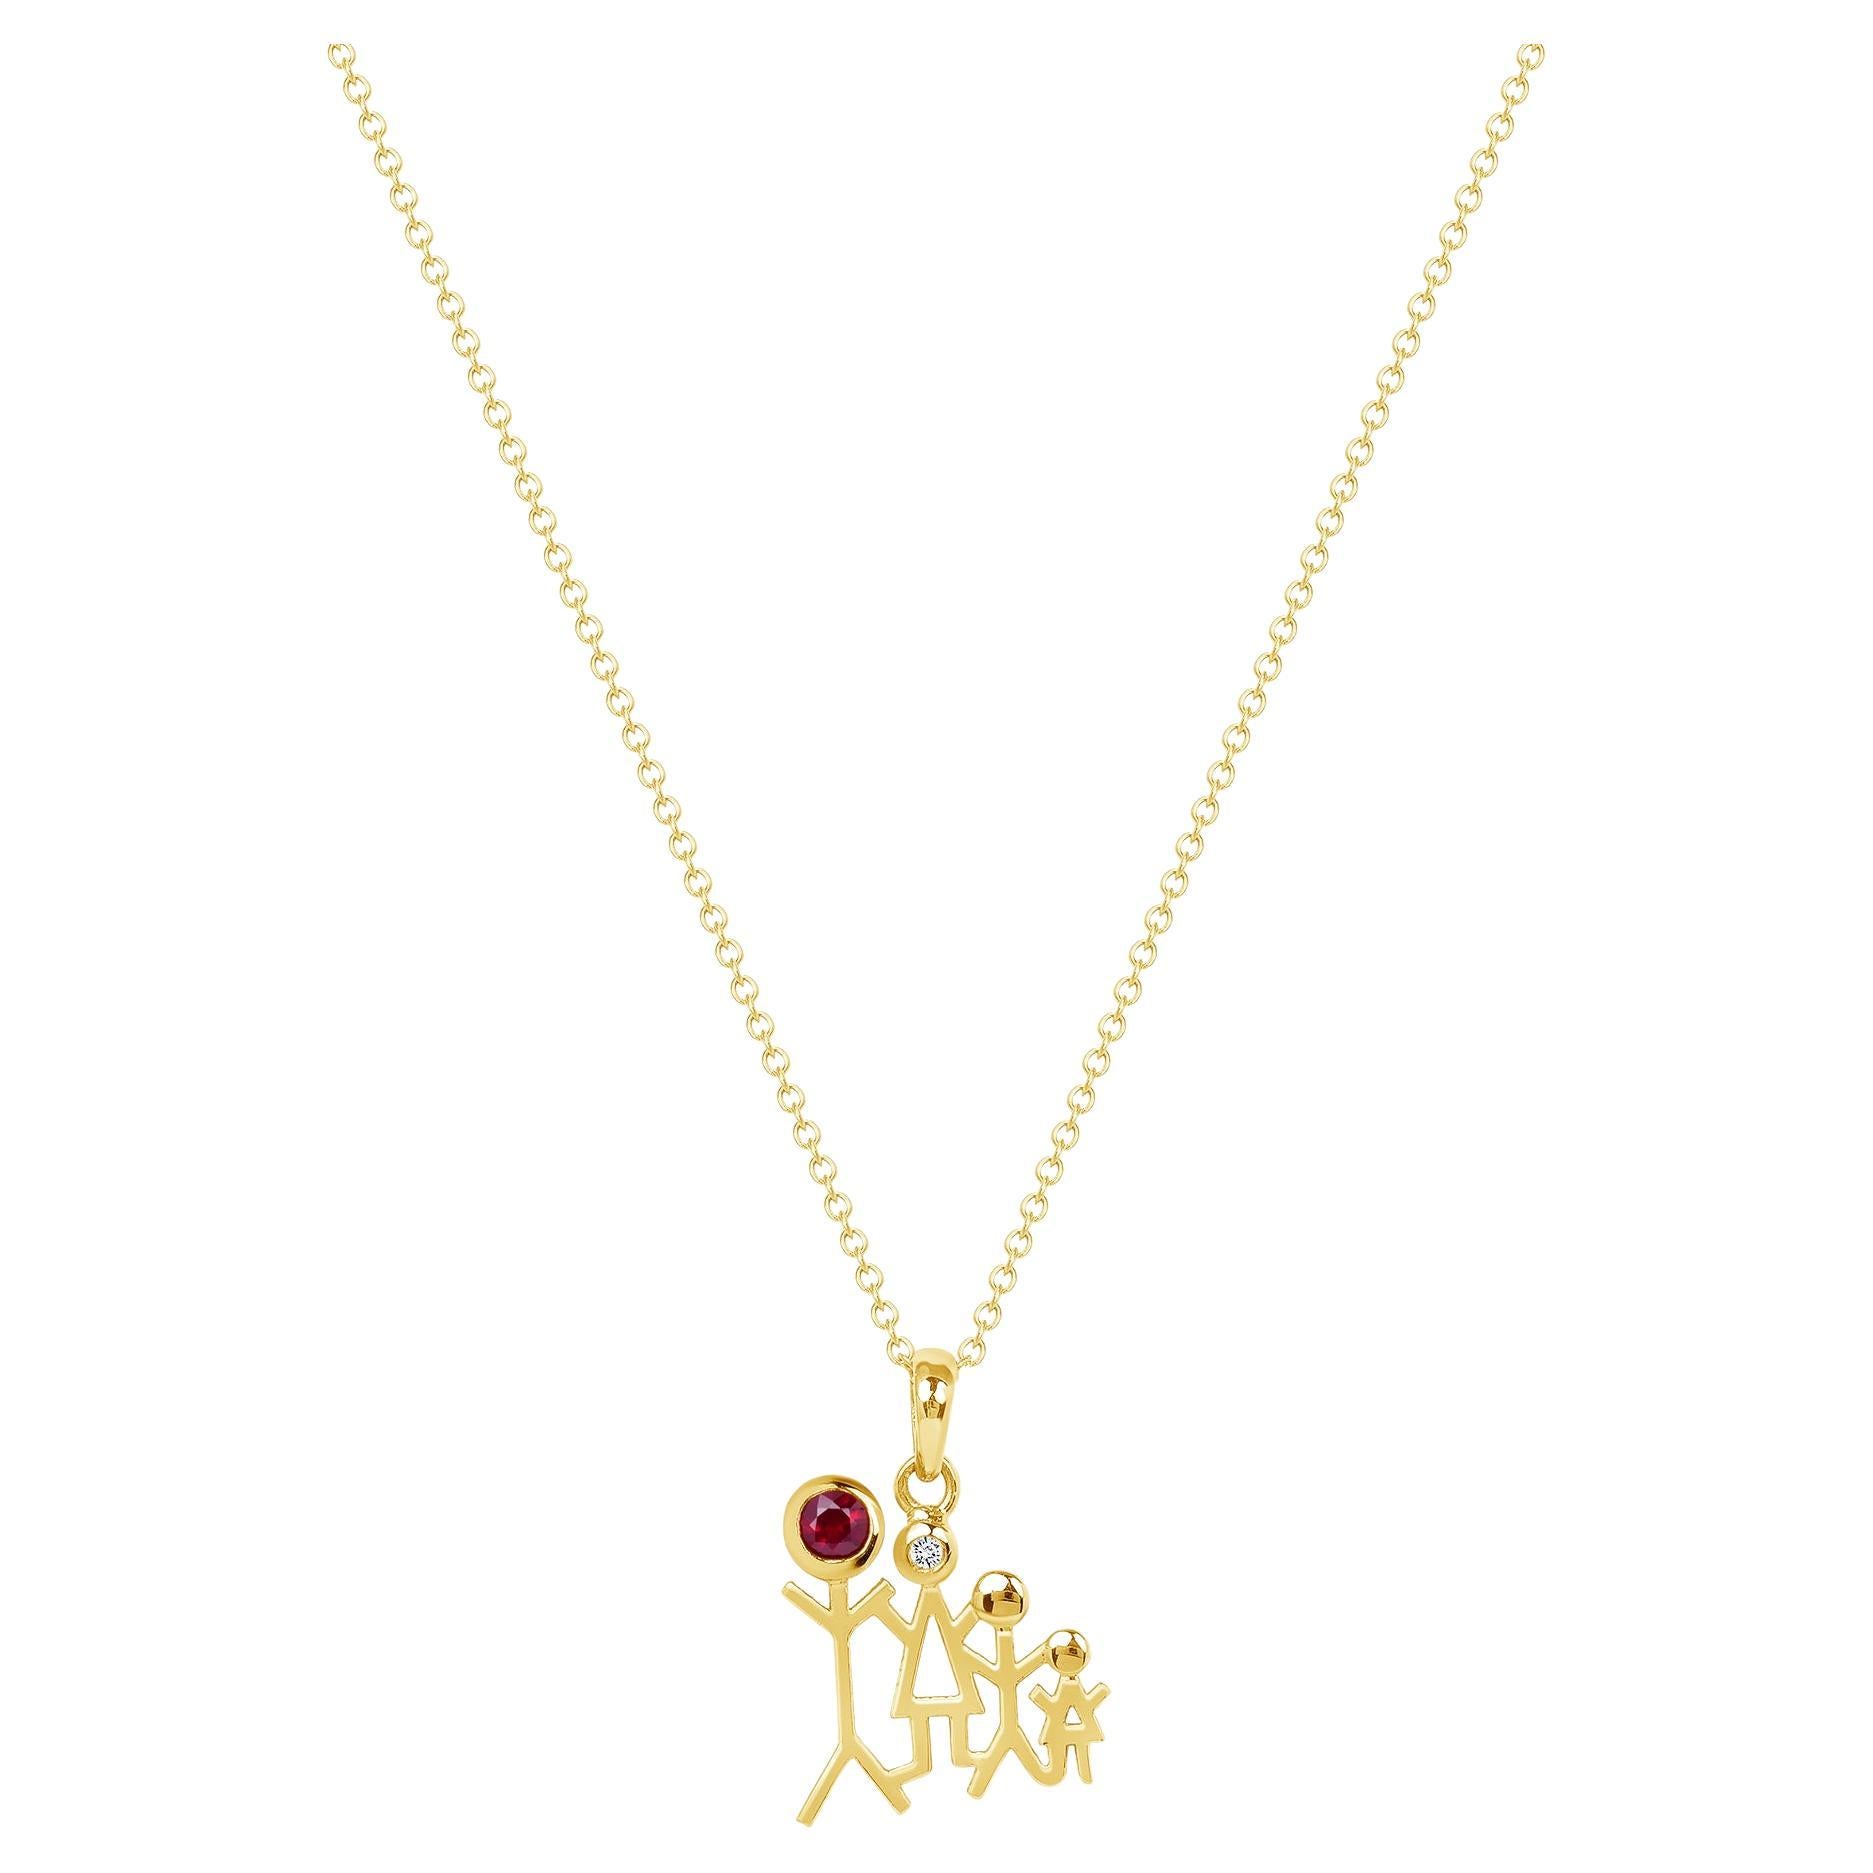 Ruby Diamond Yellow Gold Family Stick Figure Pendant Necklace.

This pendant necklace was handmade with 18-karat yellow gold. It features a 0.10-carat ruby and a 0.03-carat diamond. This pendant is on an 18-inch chain necklace with a lobster clasp.